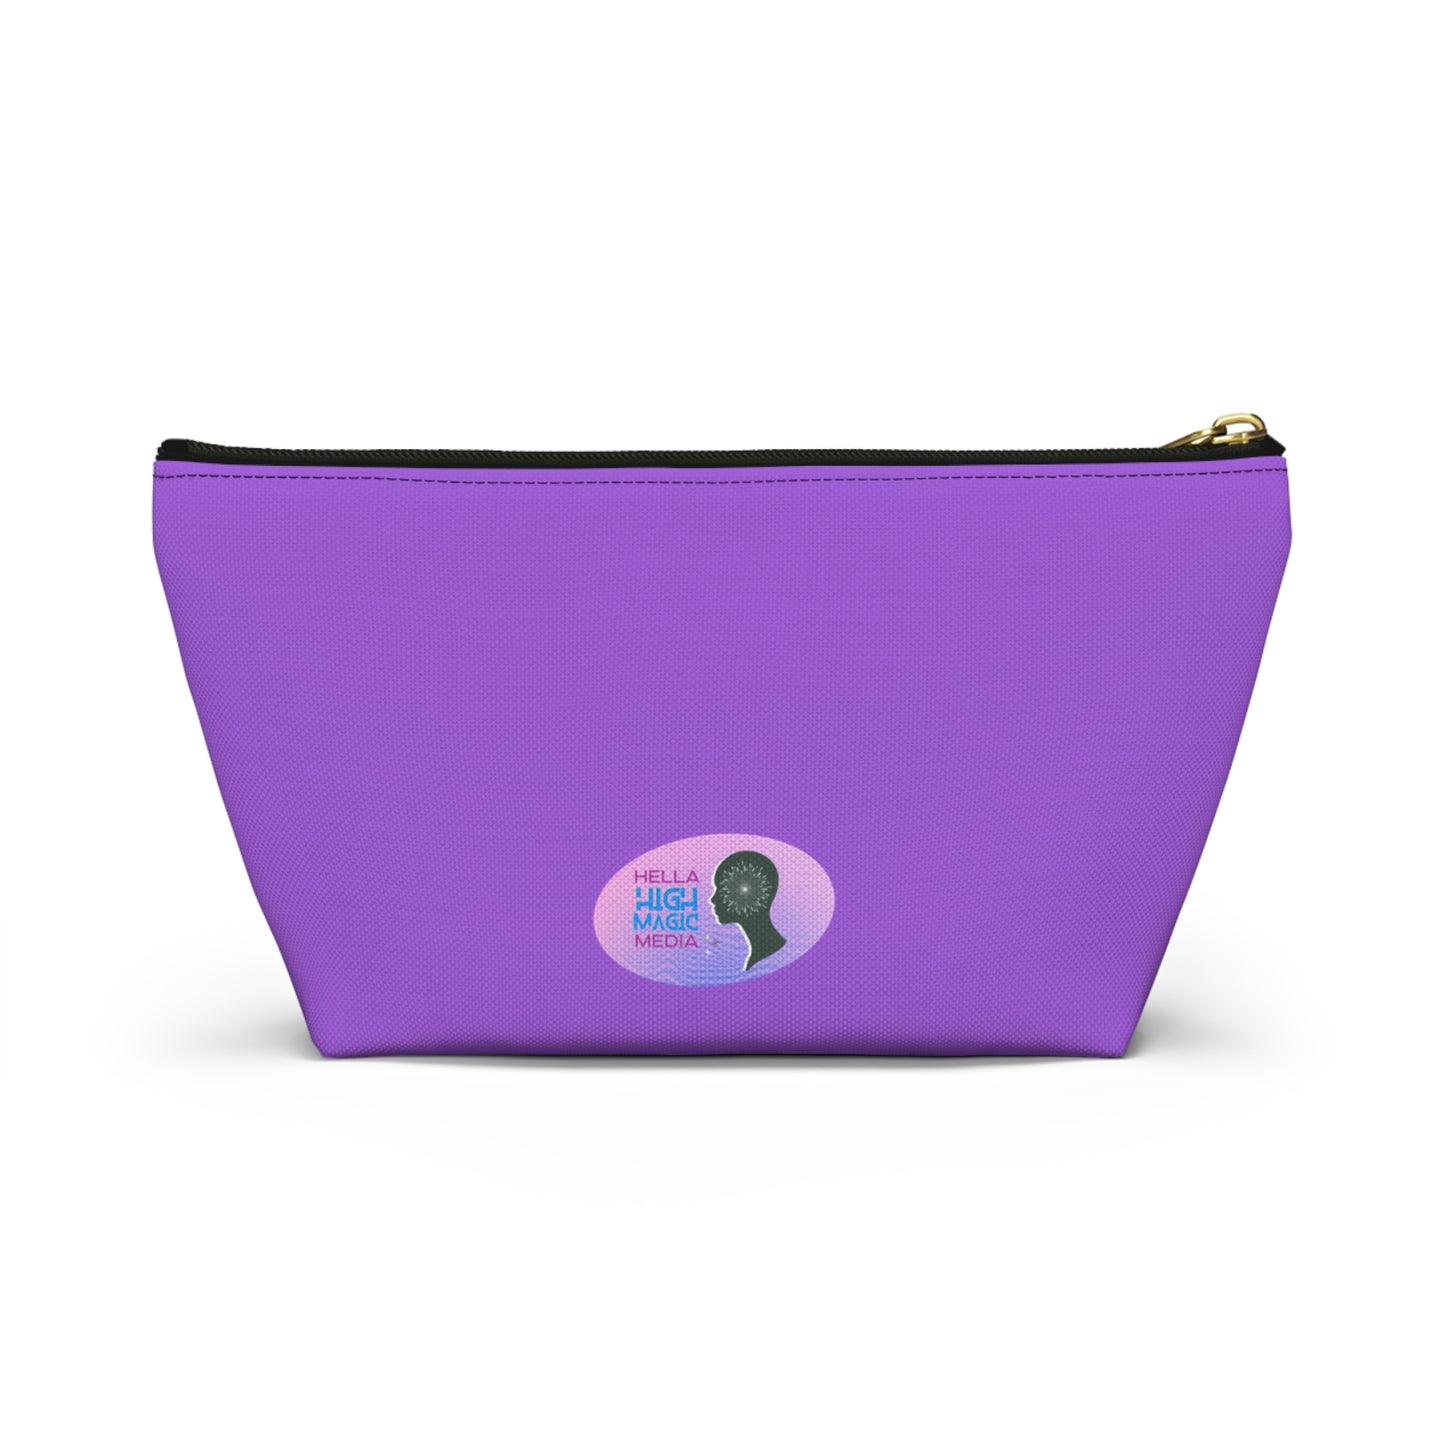 Make tech more all the things - Accessory Pouch w T-bottom